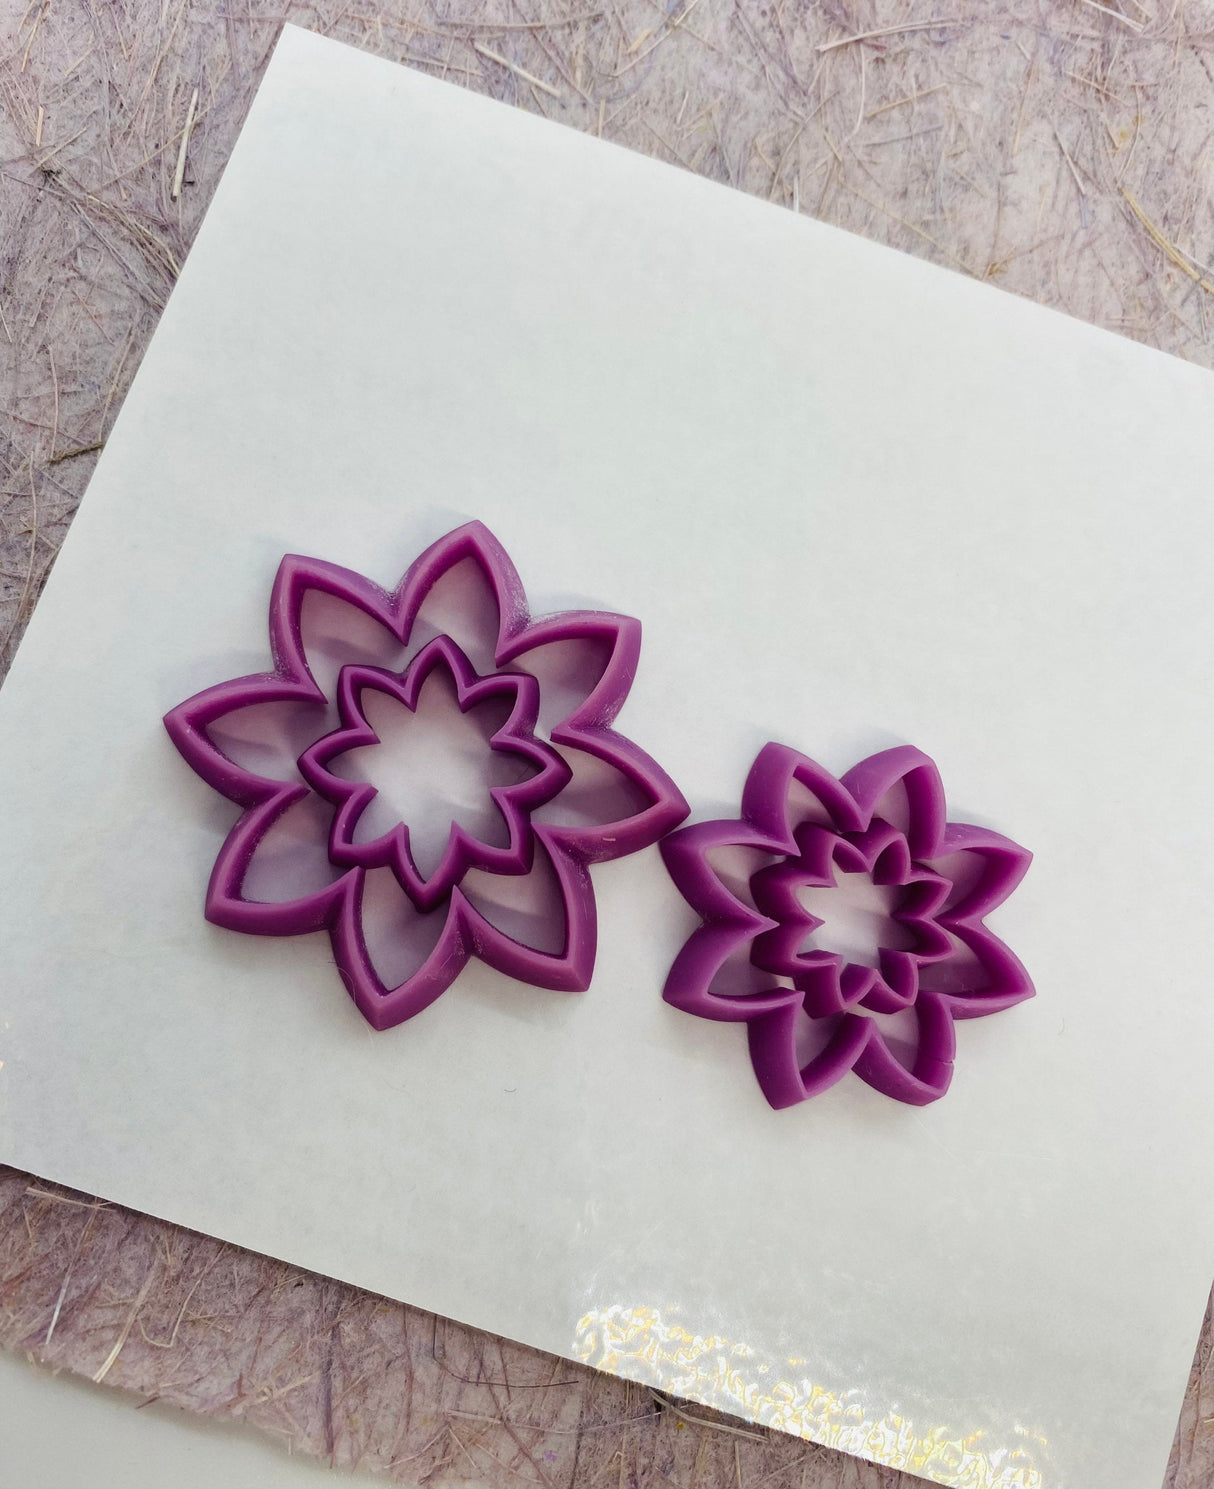 Resin Polymer clay shape cutters, precious metal, ceramic clay cutters, Gilly cutters (8 Point flowers)